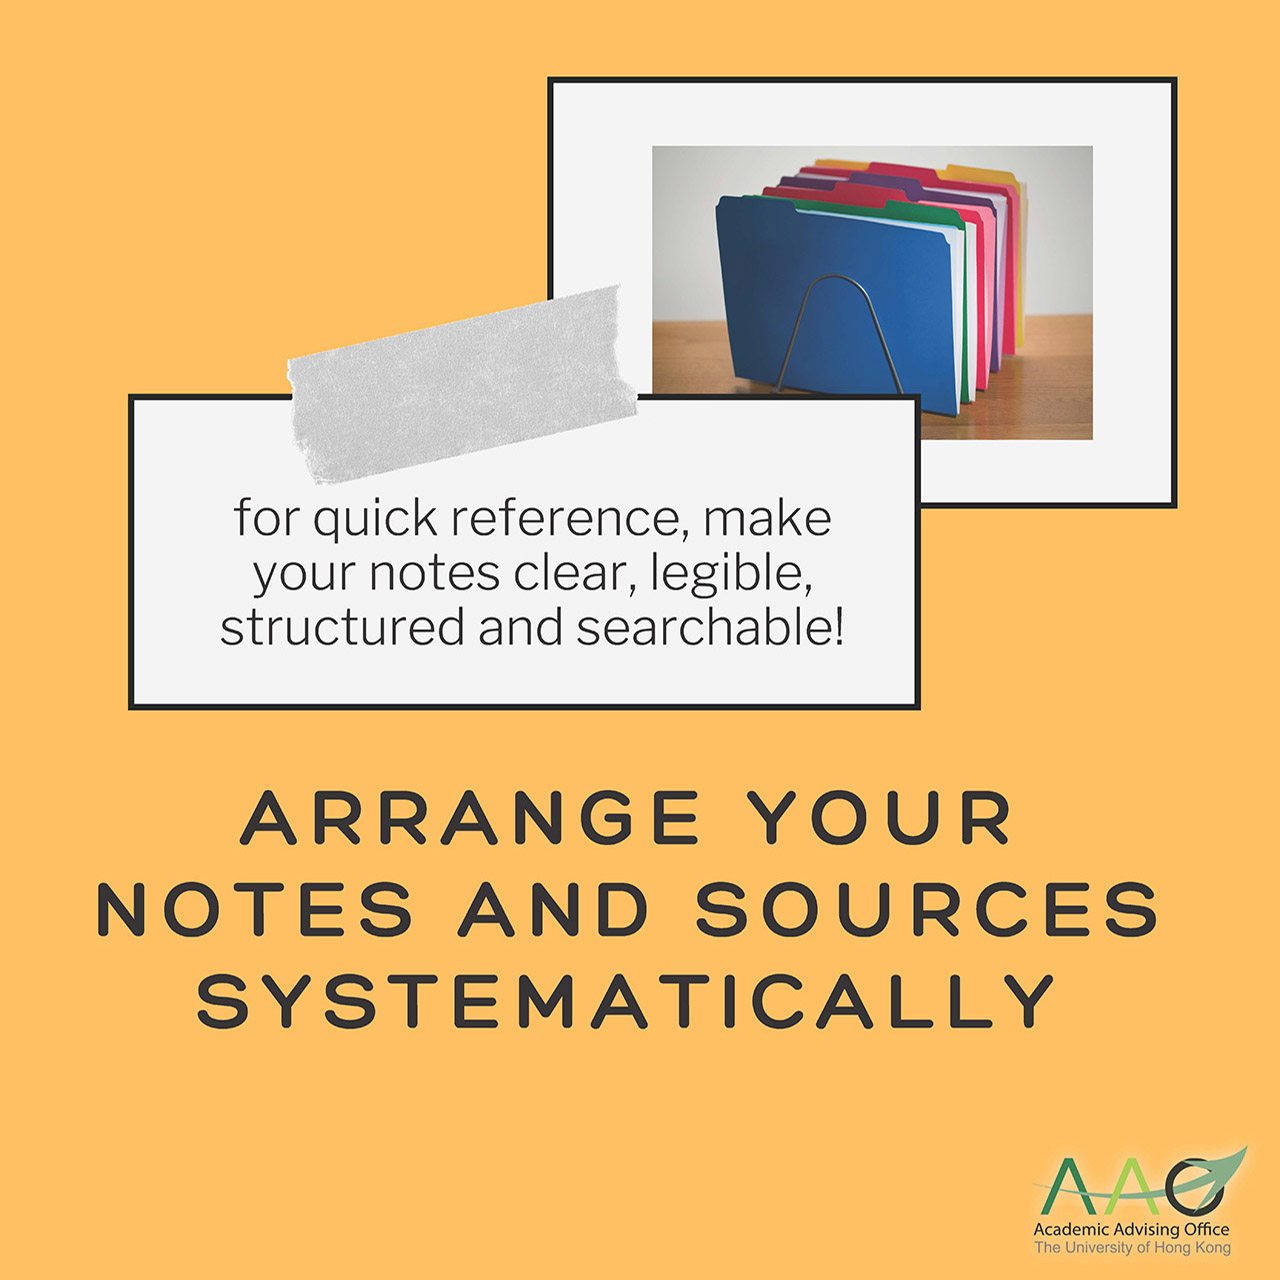 Arrange your notes and sources systematically for quick reference, make your notes clear, legible, structured and searchable!